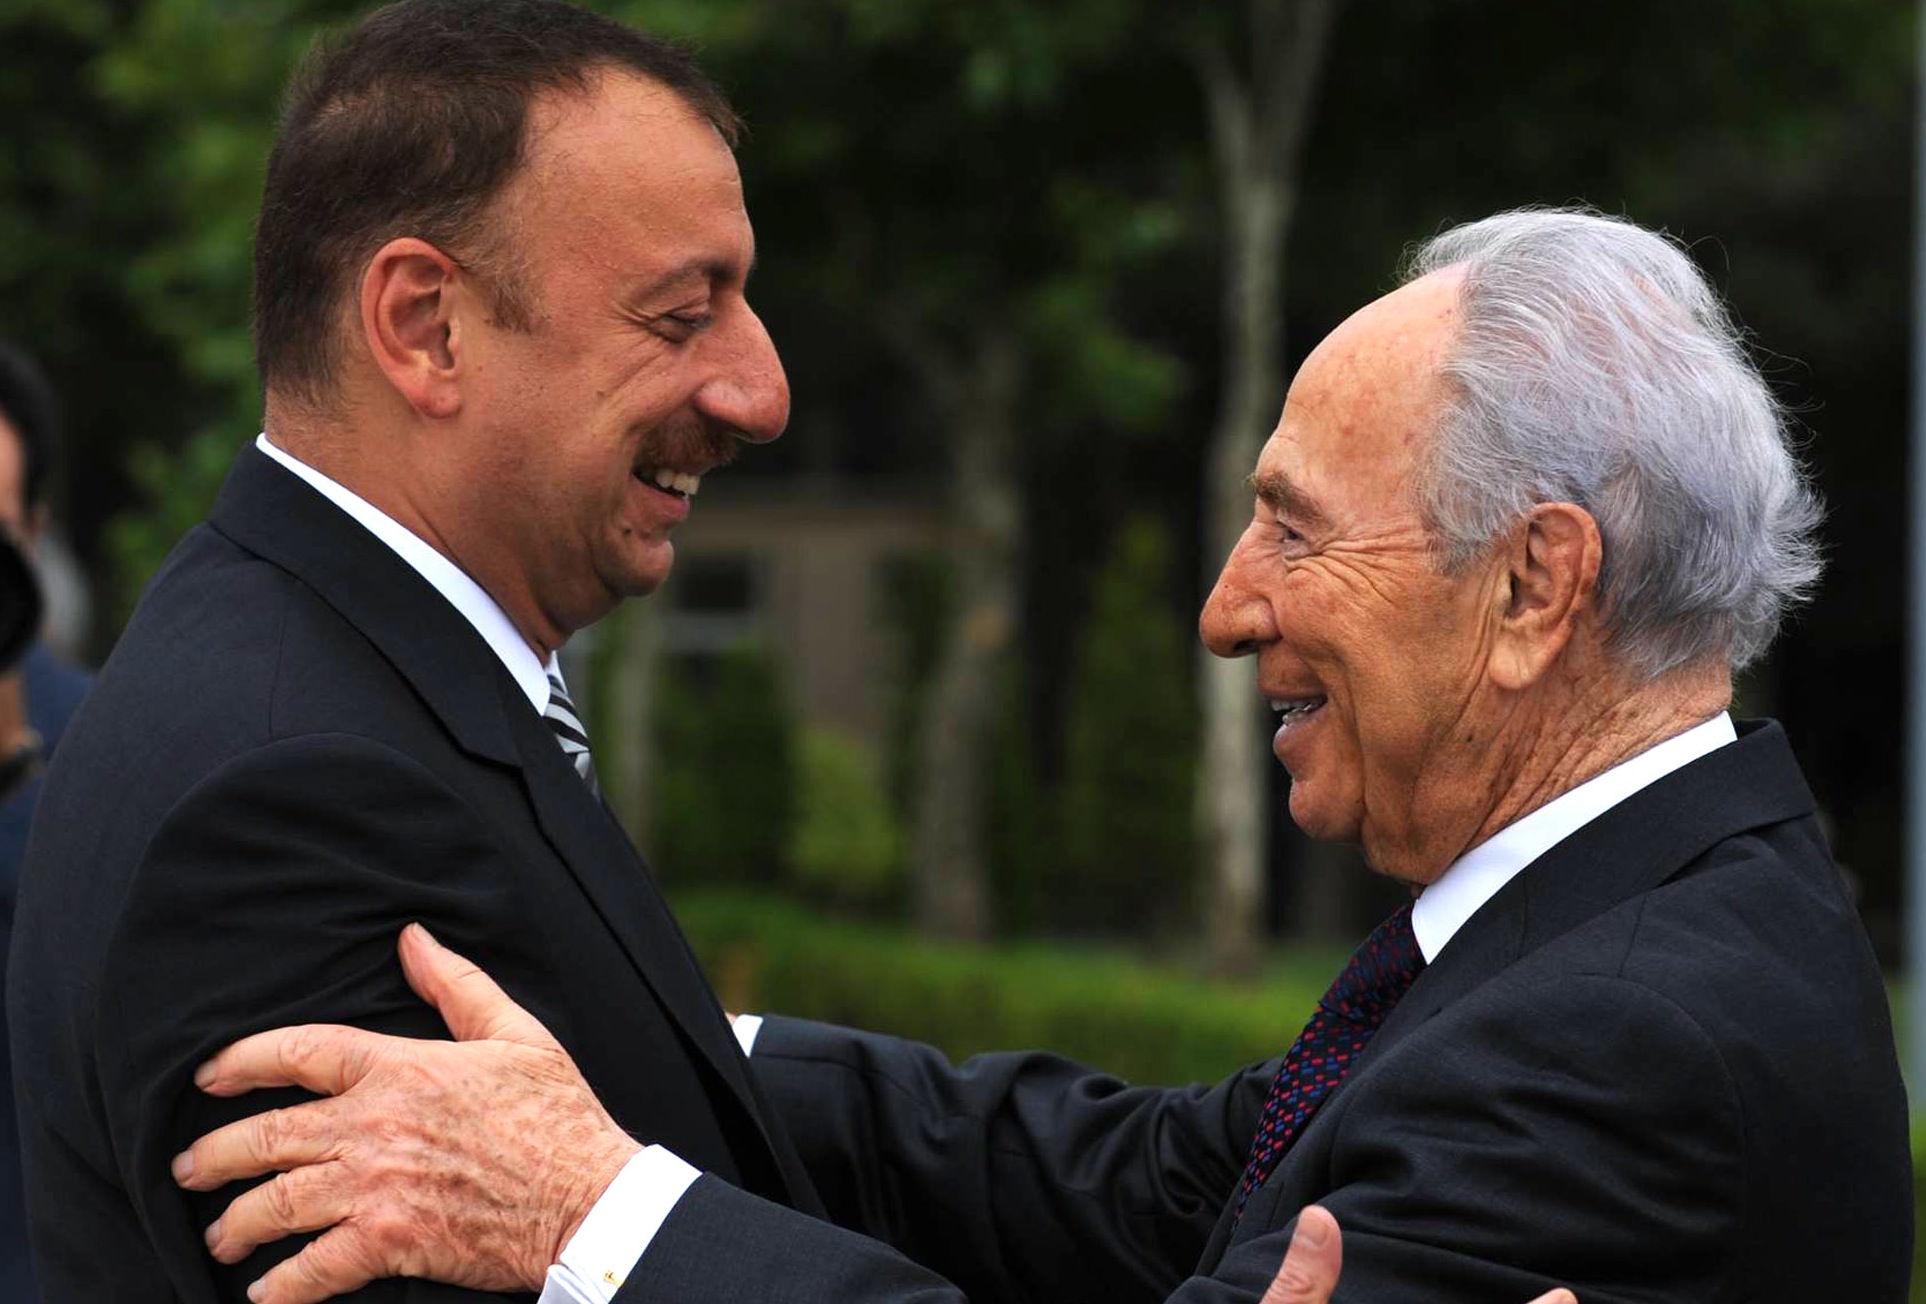 Israeli President Shimon Peres and Azeri President Ilham Heydar meet at the presidential palace in Baku, June 28, 2009. (Amos Ben Gershom/GPO via Getty Images)